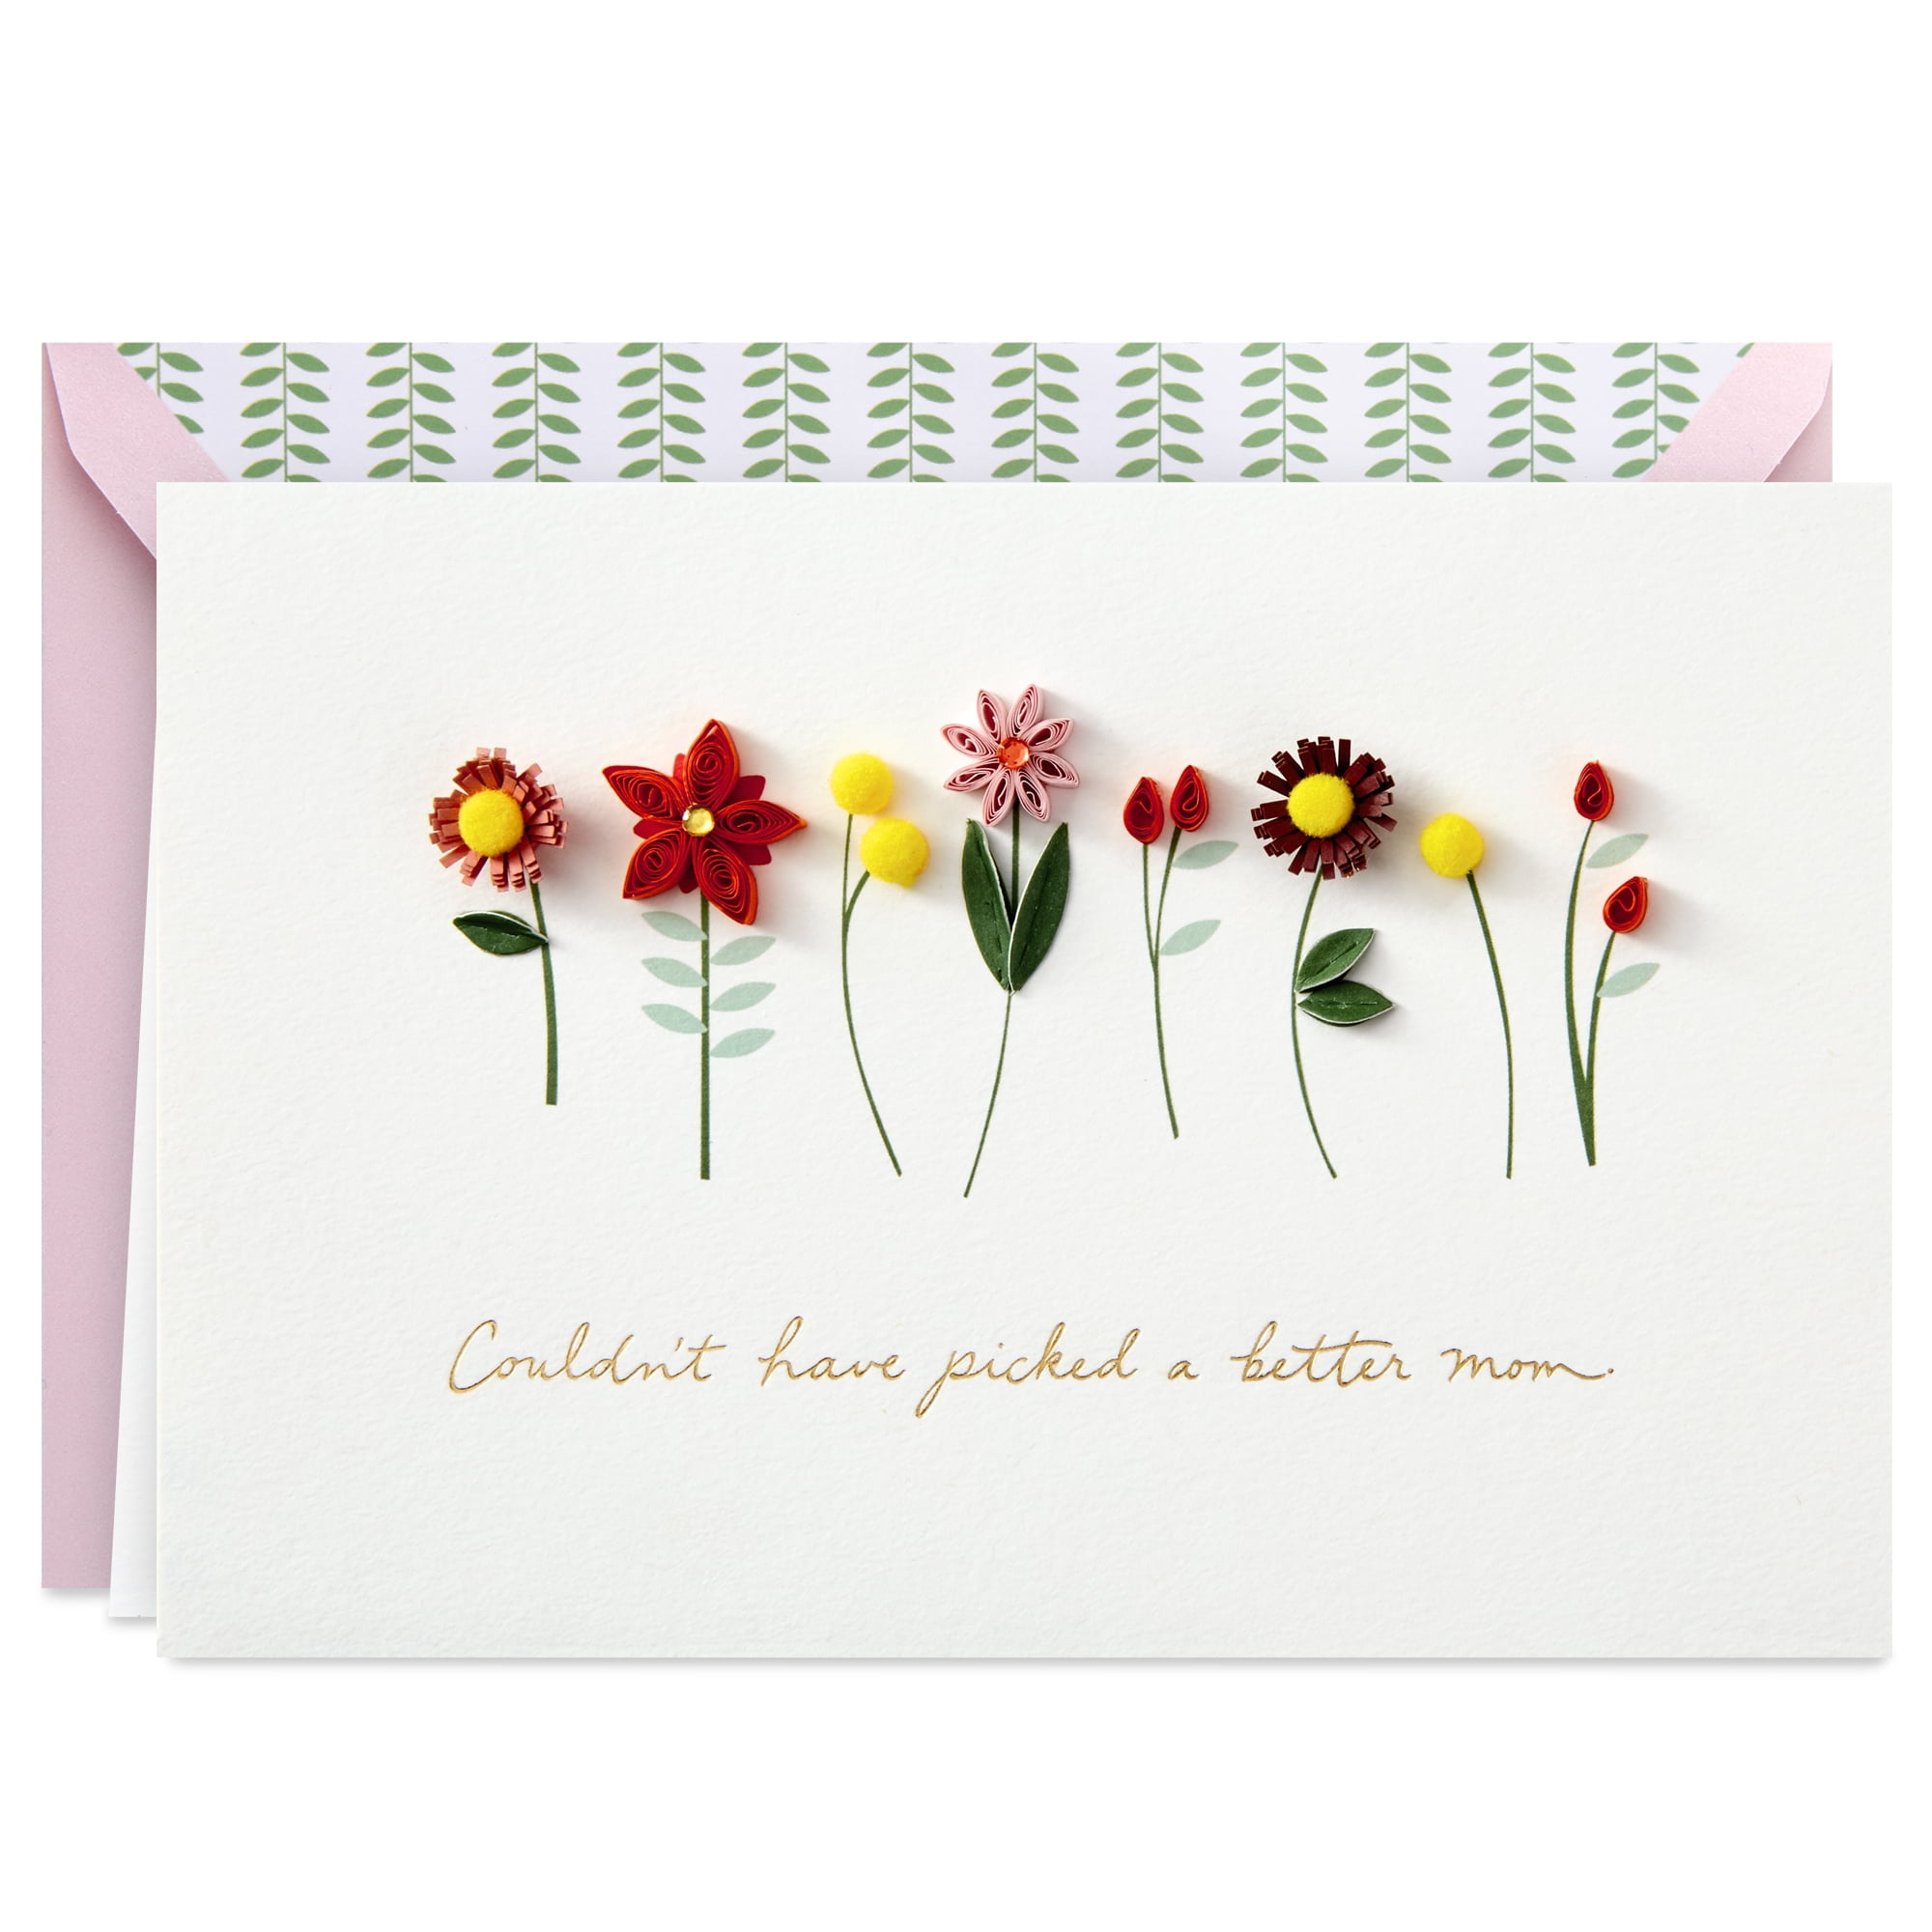 hallmark-signature-mothers-day-card-quilled-flowers-couldn-t-have